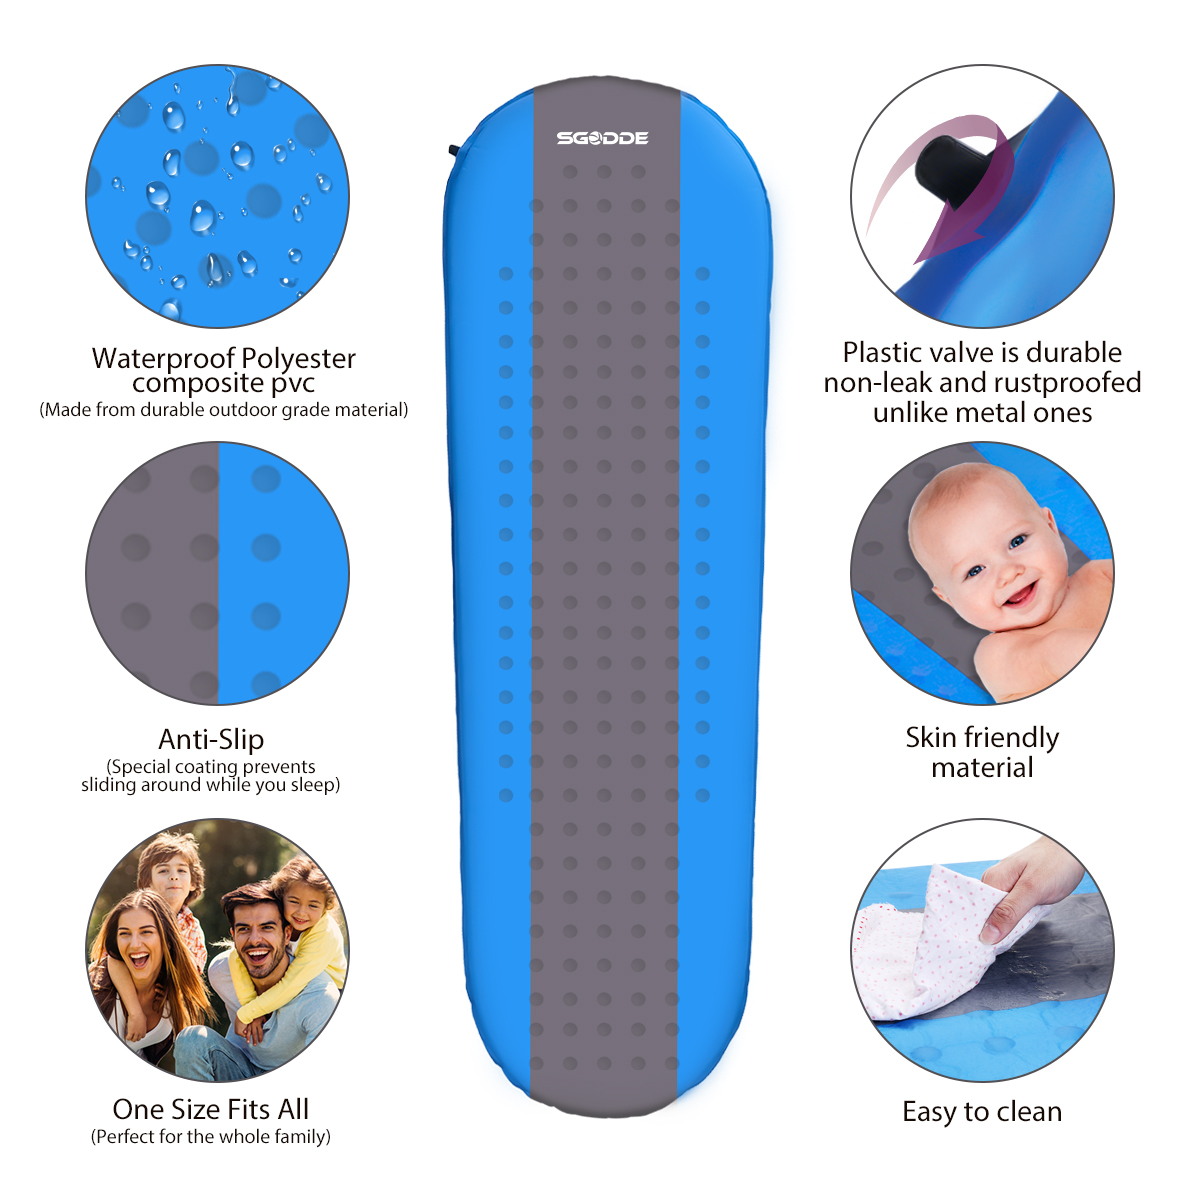 SGODDE-Inflatable-Sleeping-Mat-with-Pillow-Self-Inflating-Sleeping-Pad-Roll-Up-Foam-Bed-Pads-for-Out-1883996-3